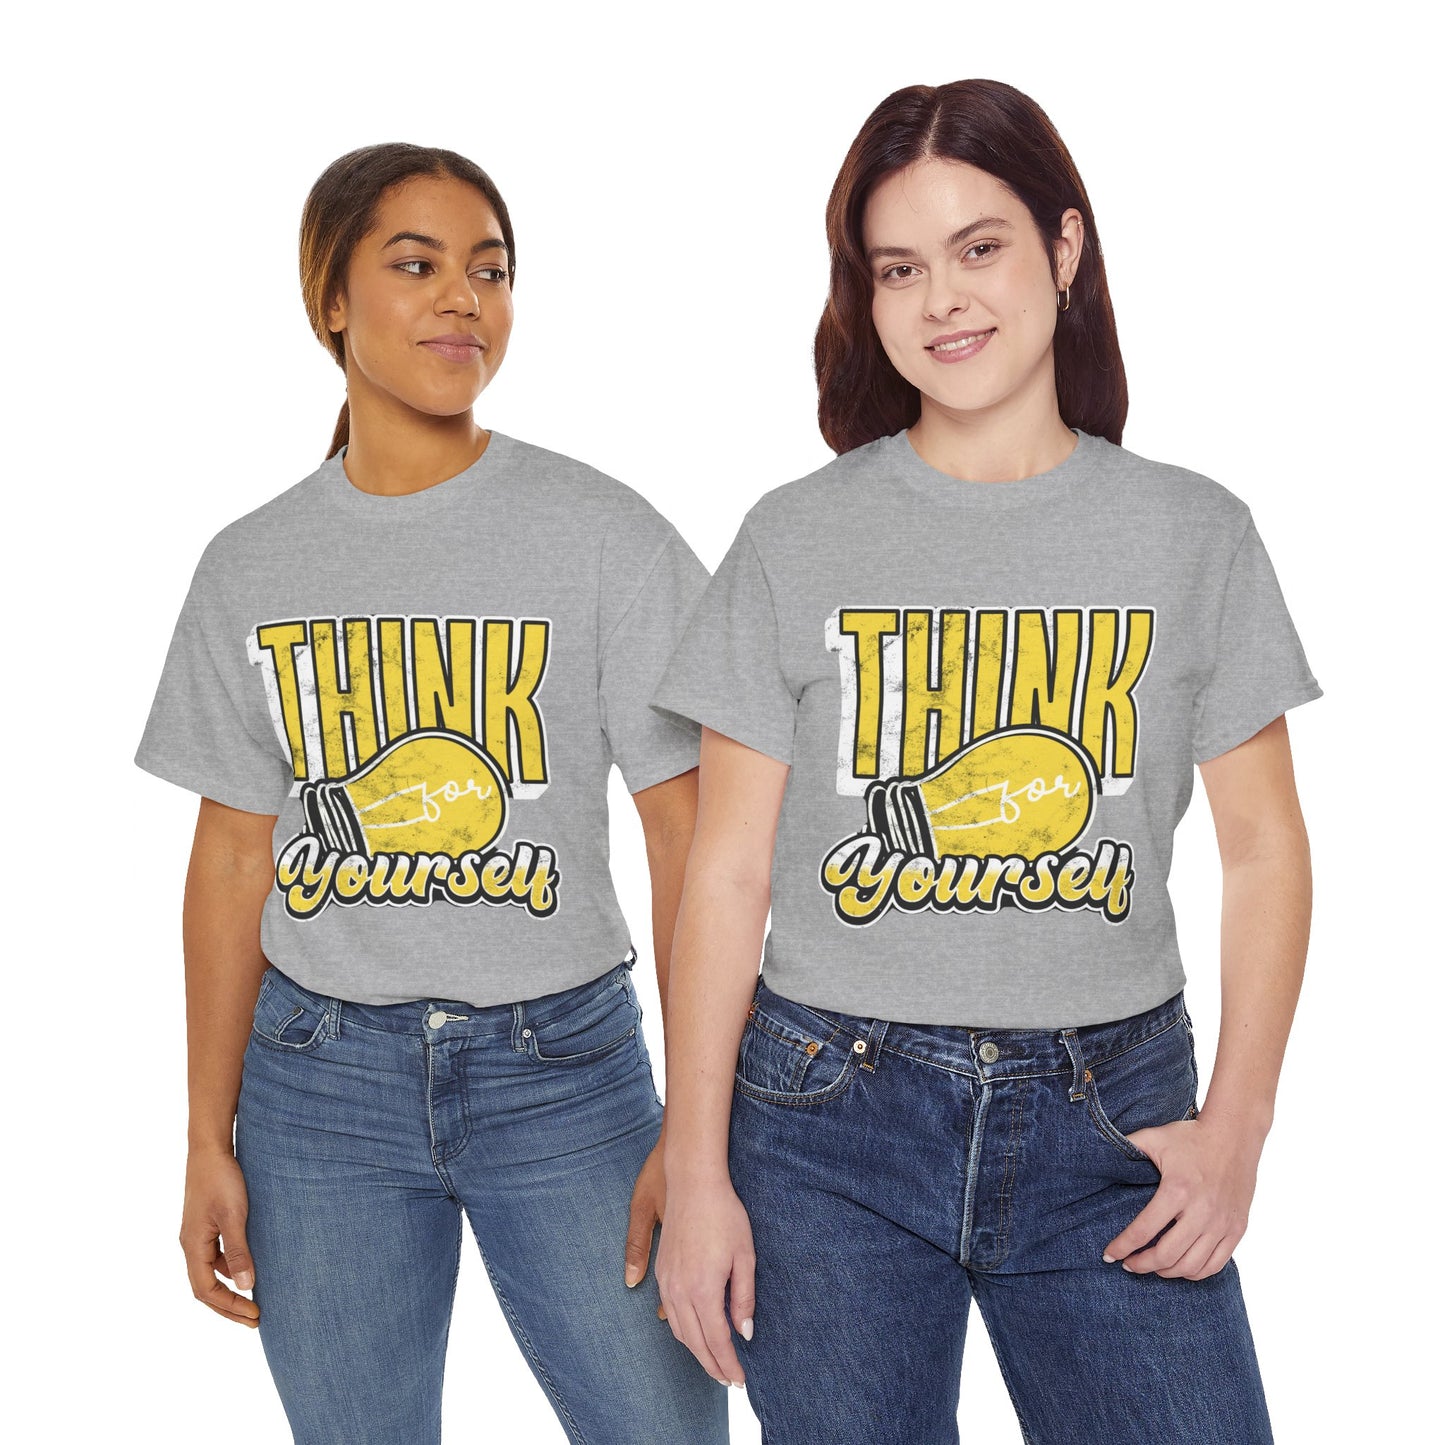 The Truth Finder T-Shirt: Think for yourself